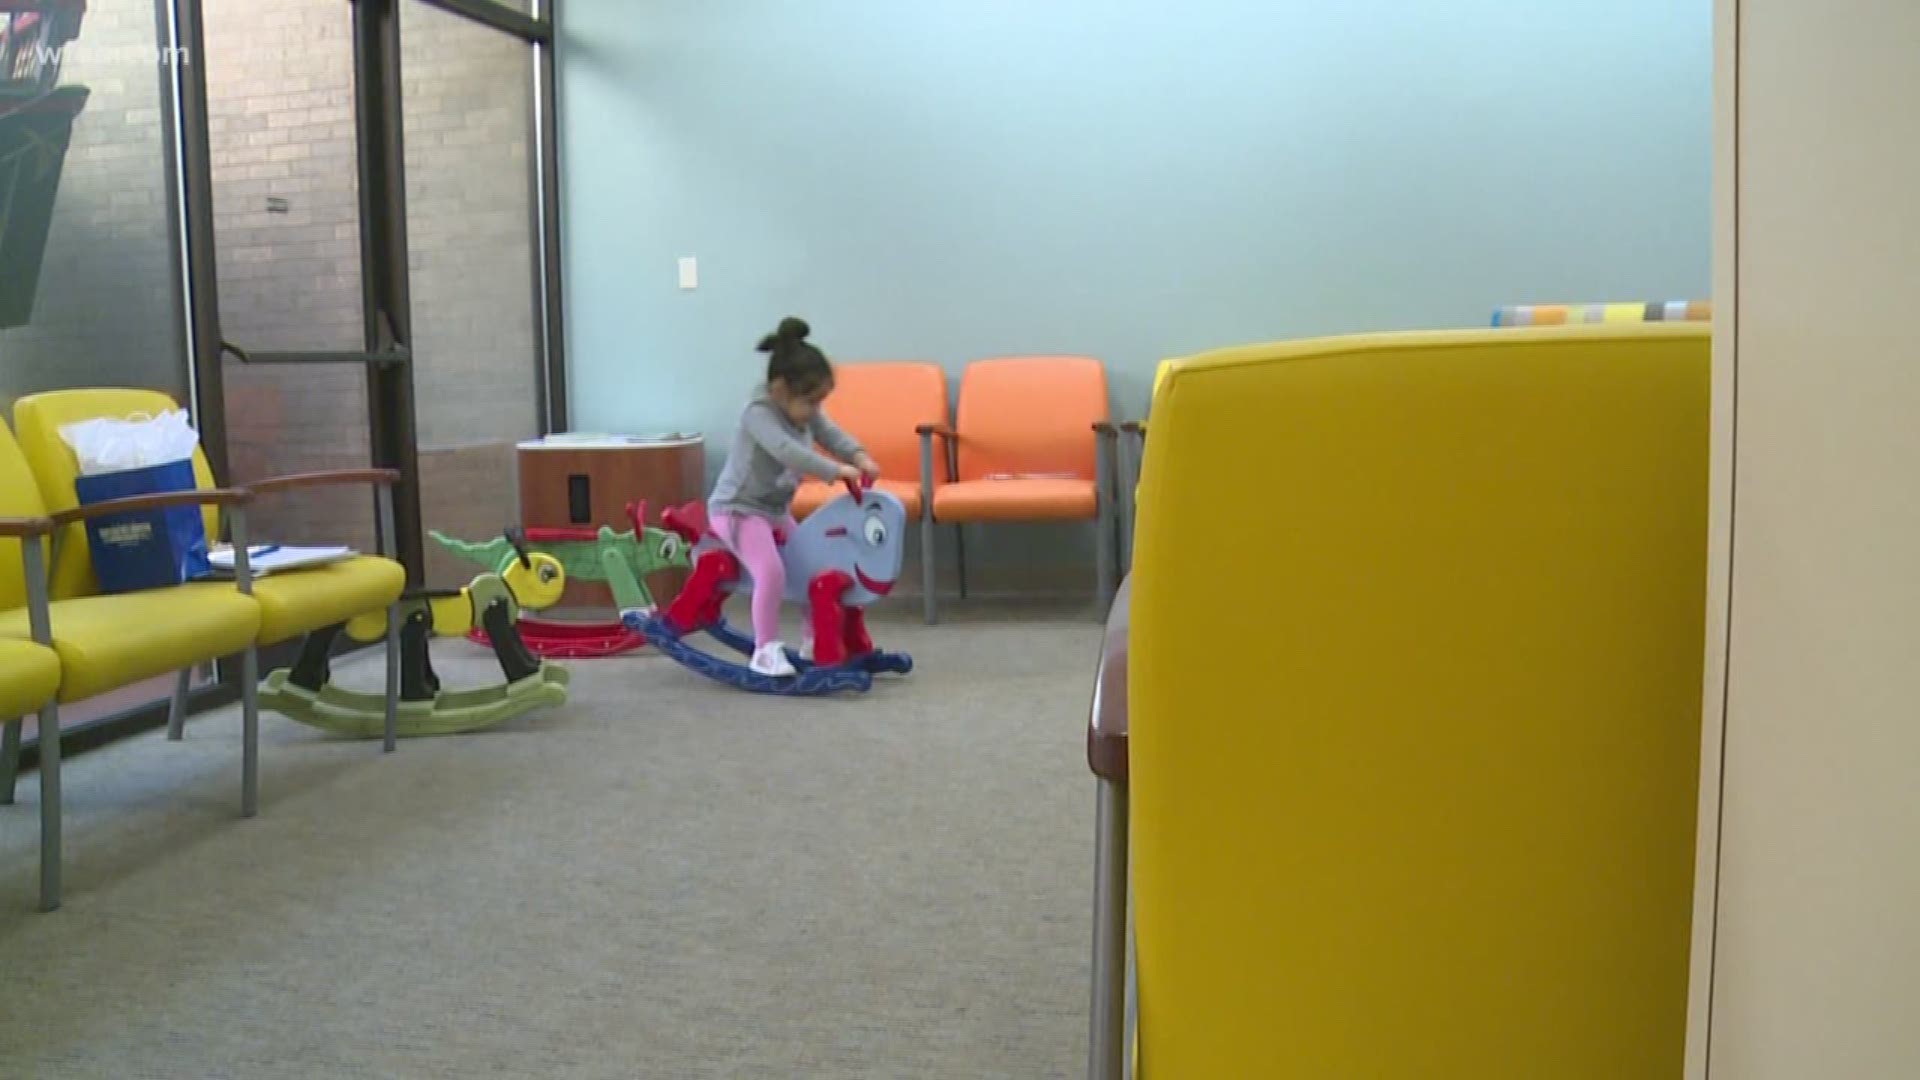 North Texas man makes homemade toys for sick children